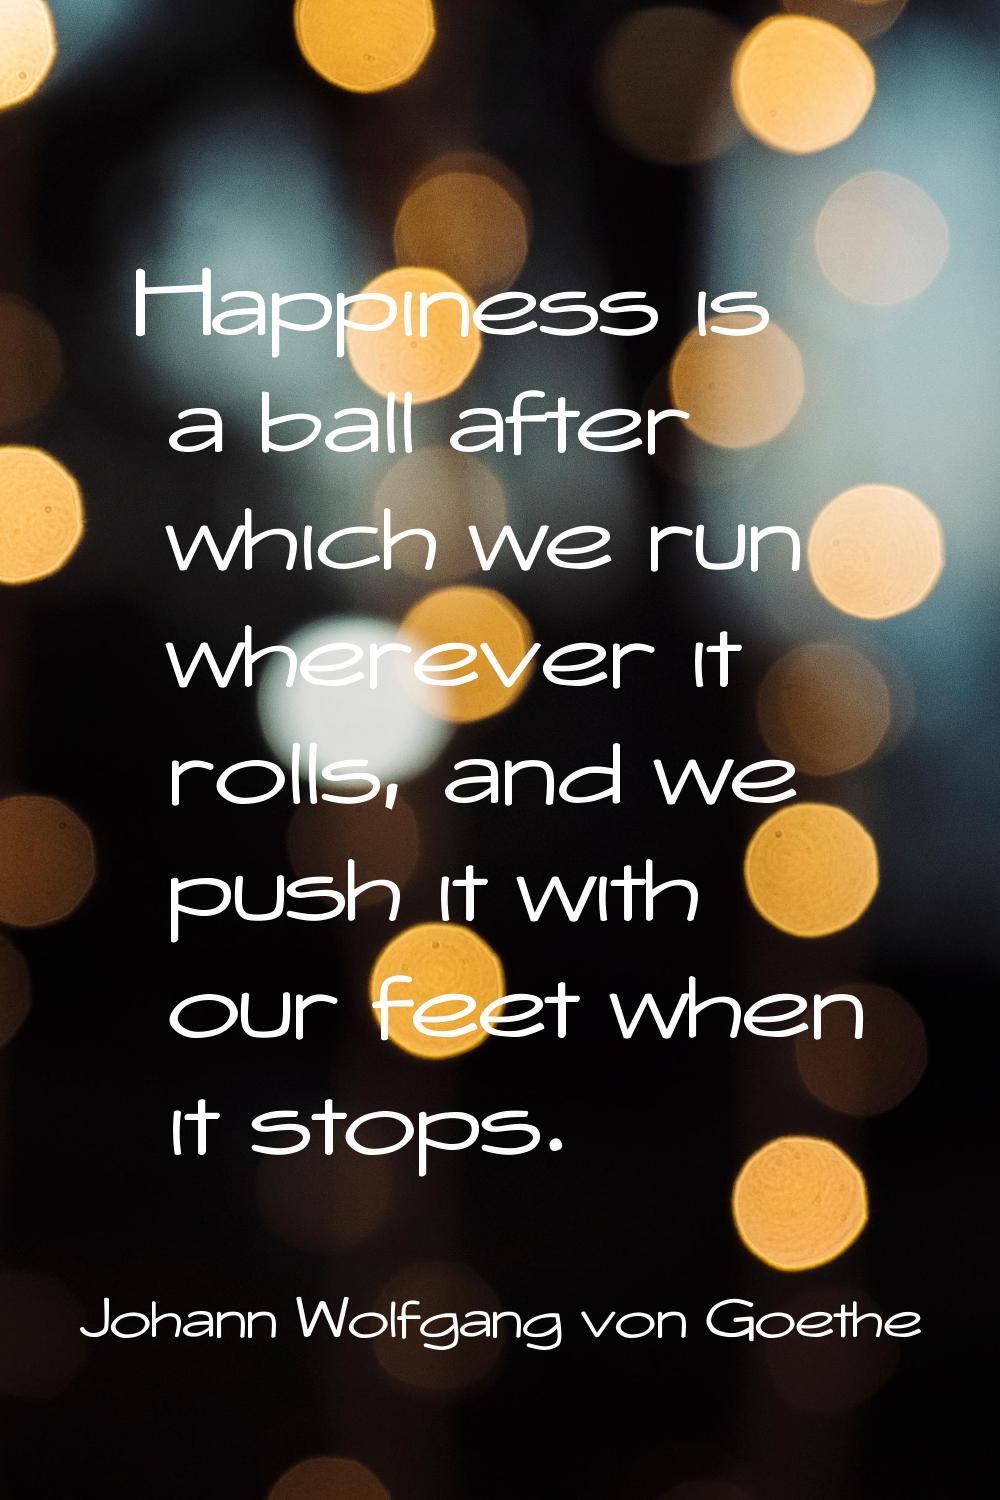 Happiness is a ball after which we run wherever it rolls, and we push it with our feet when it stop